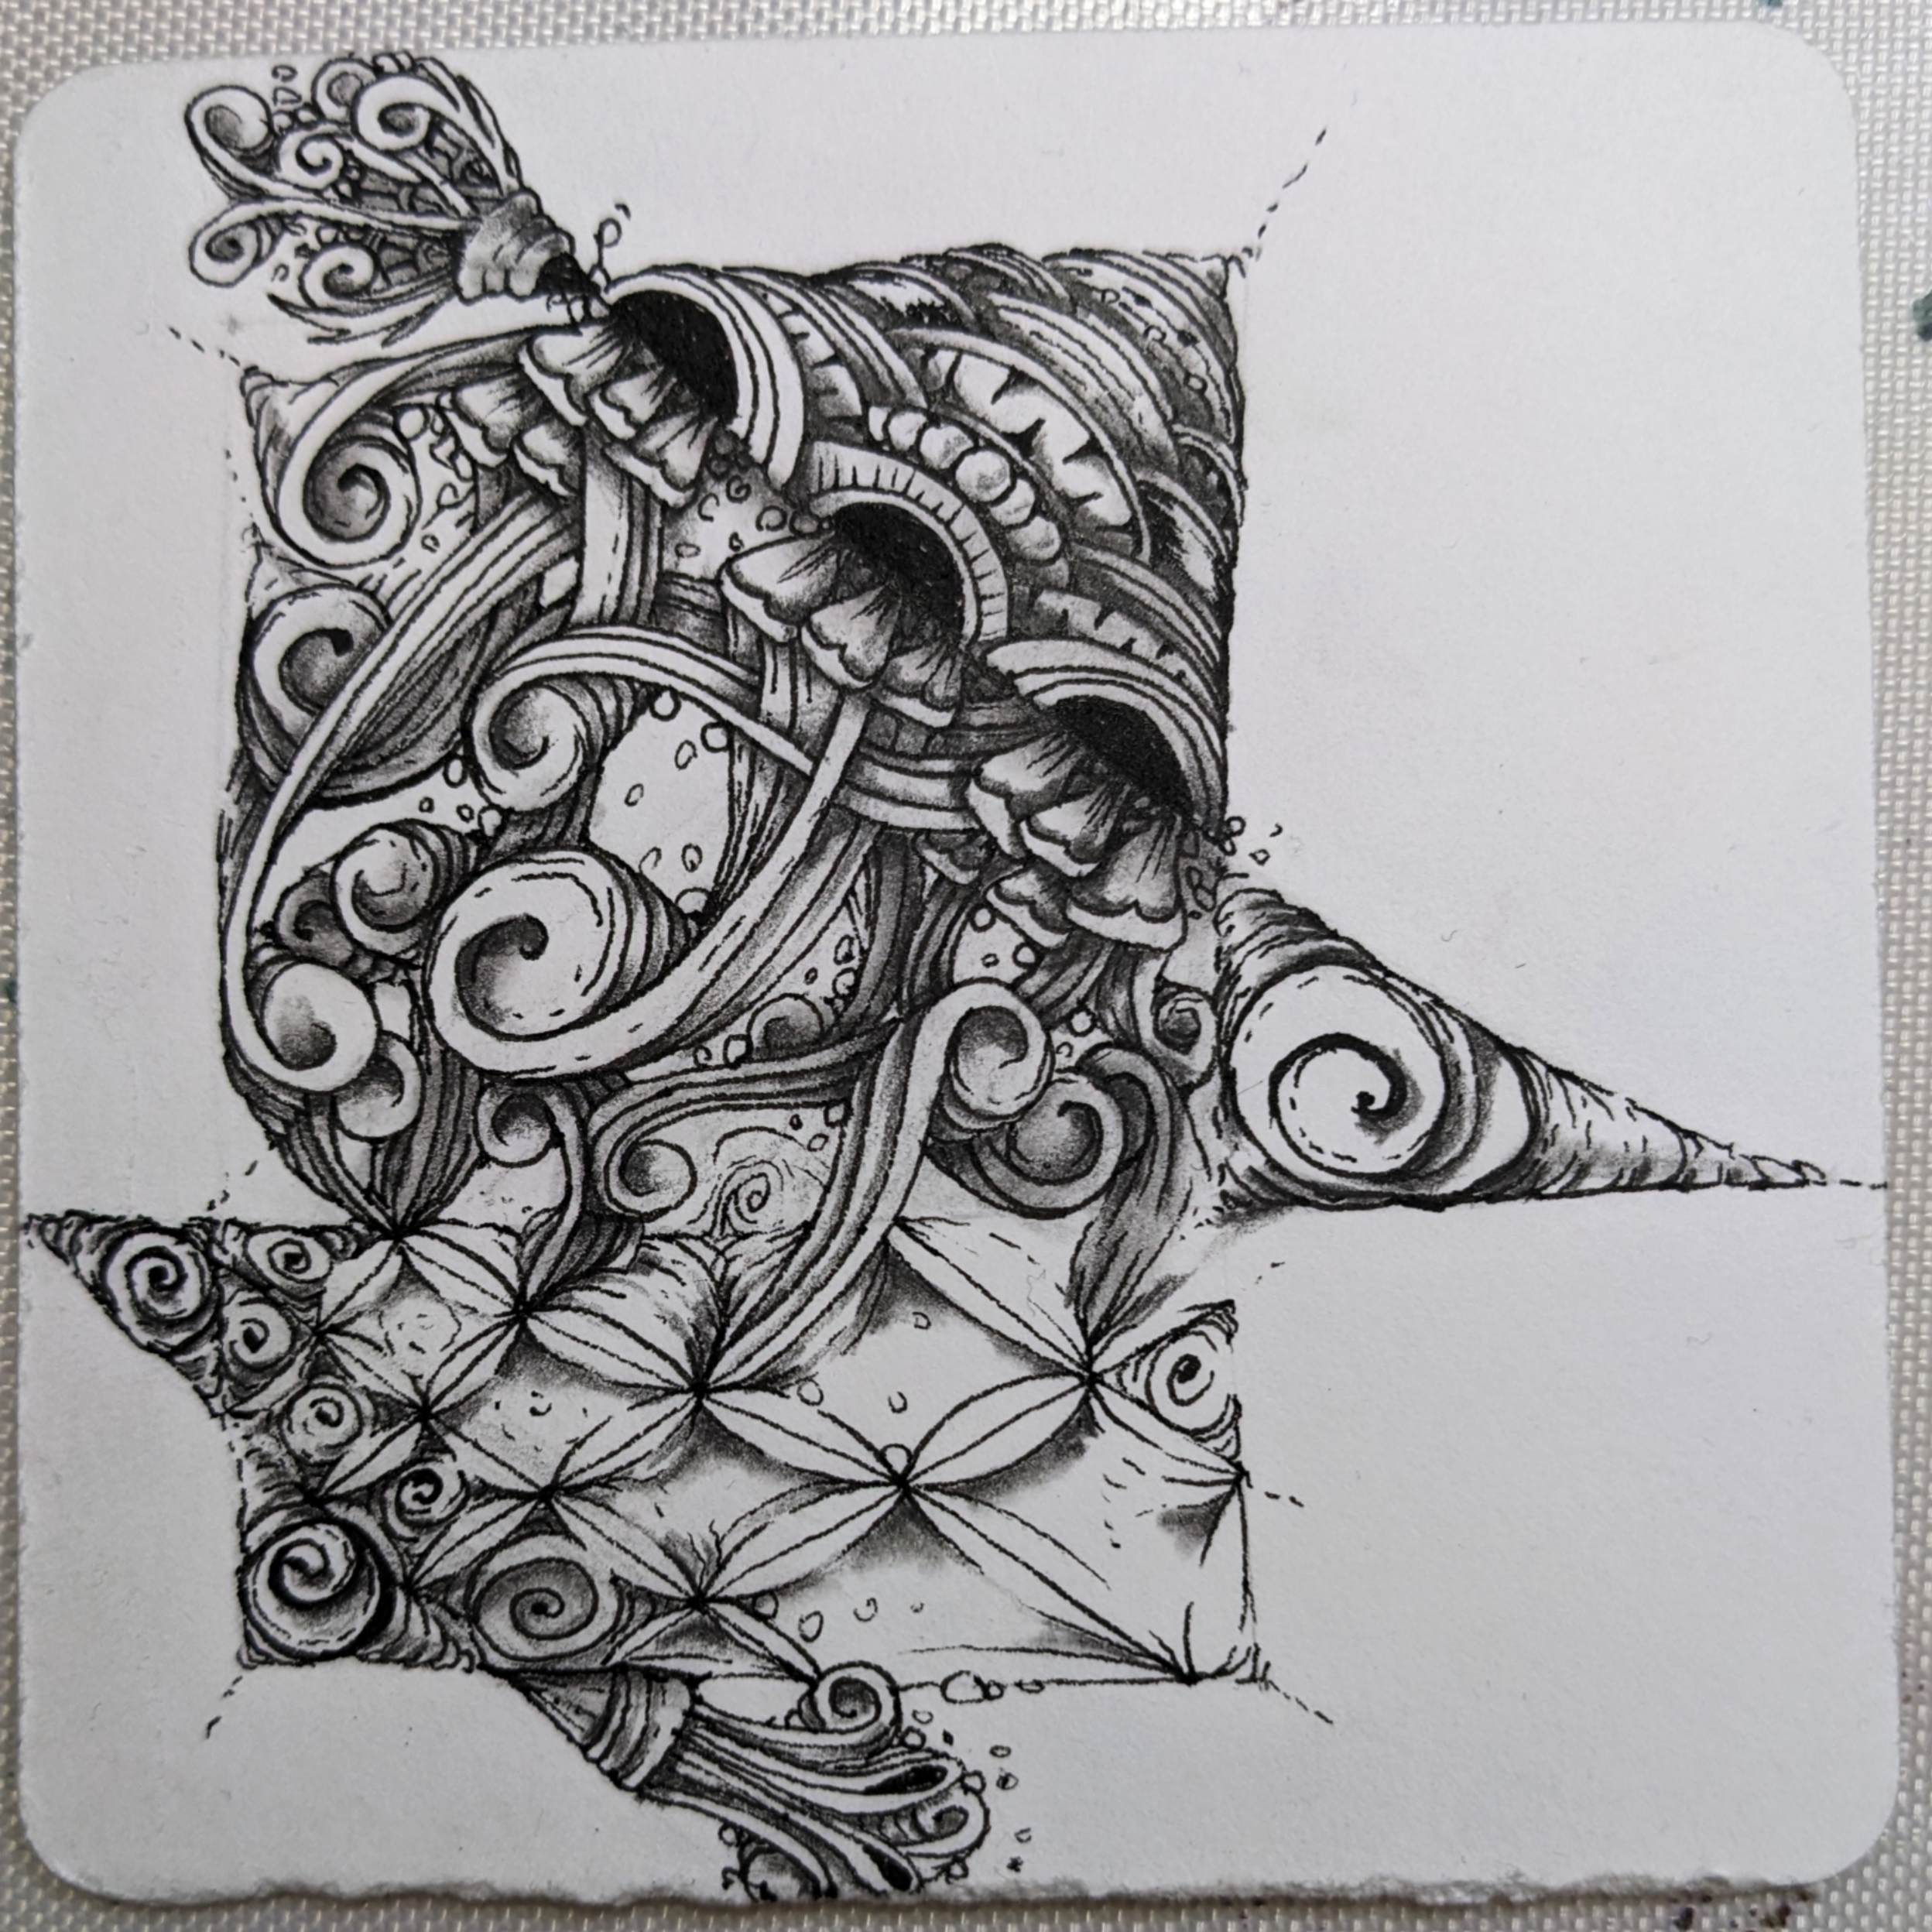 A back-to-basics Zentangle tile drawn with a Z string